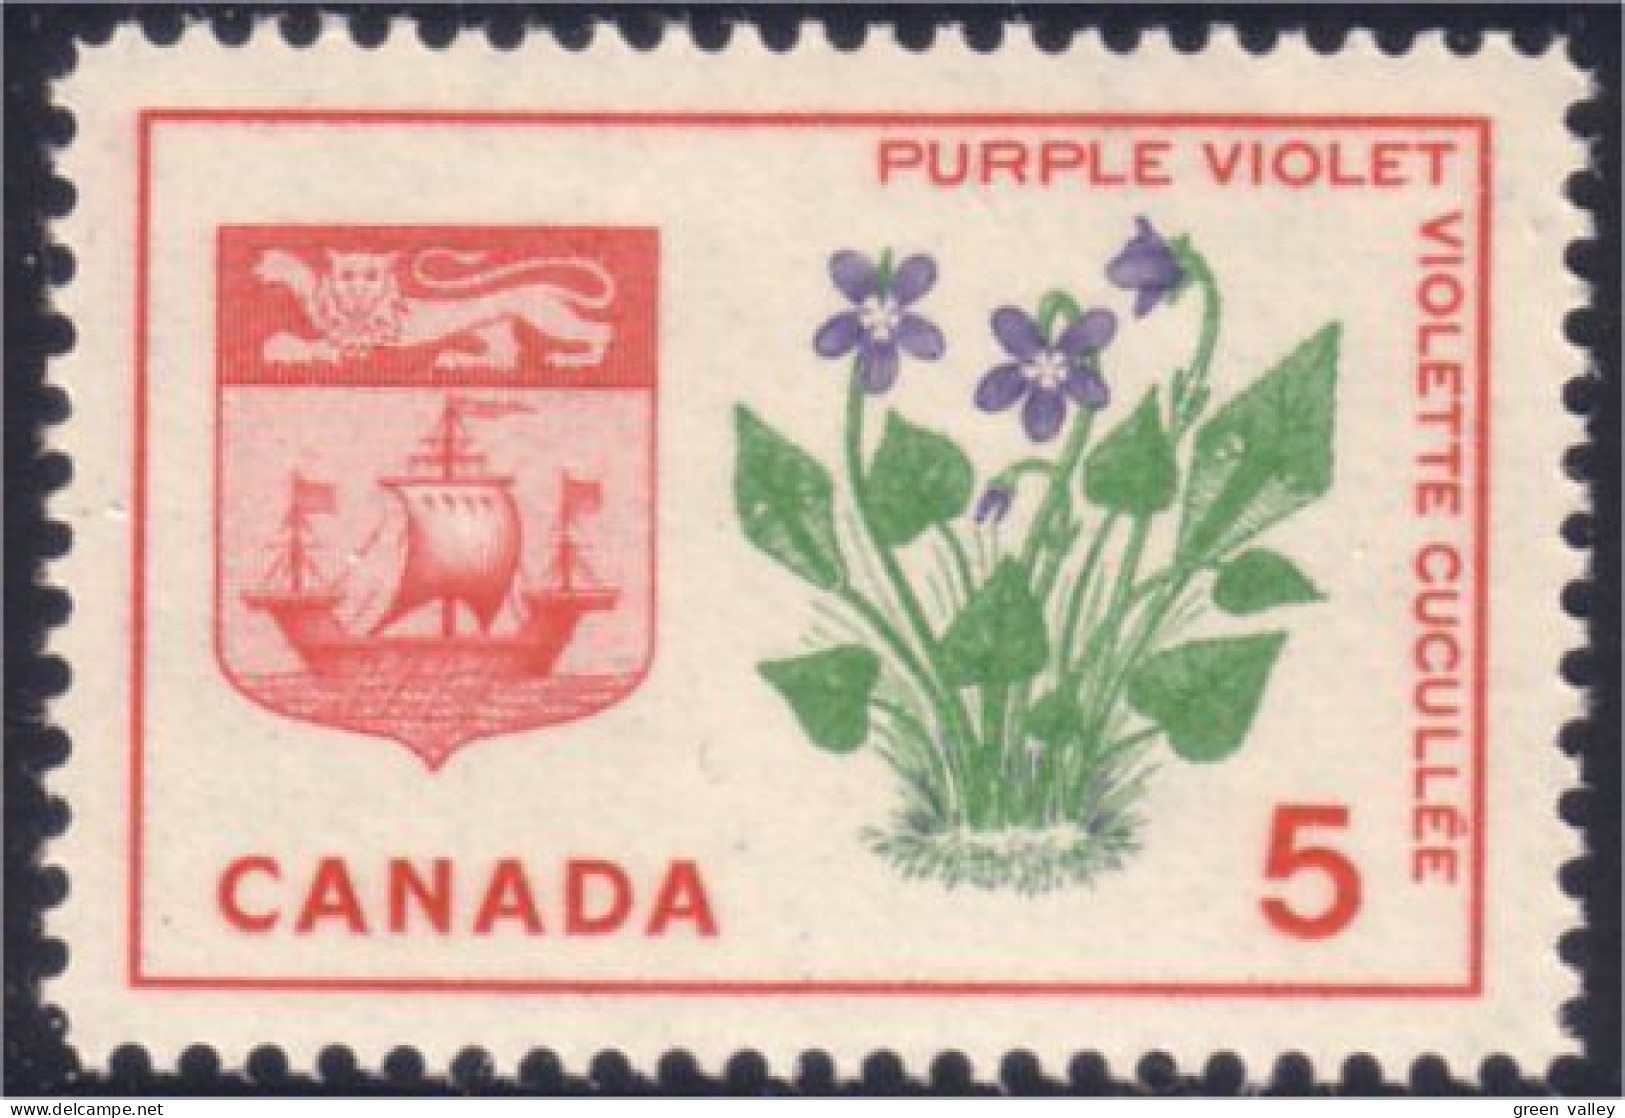 Canada Purple Violet Violette Armoiries Coat Of Arms MNH ** Neuf SC (04-21c) - Stamps